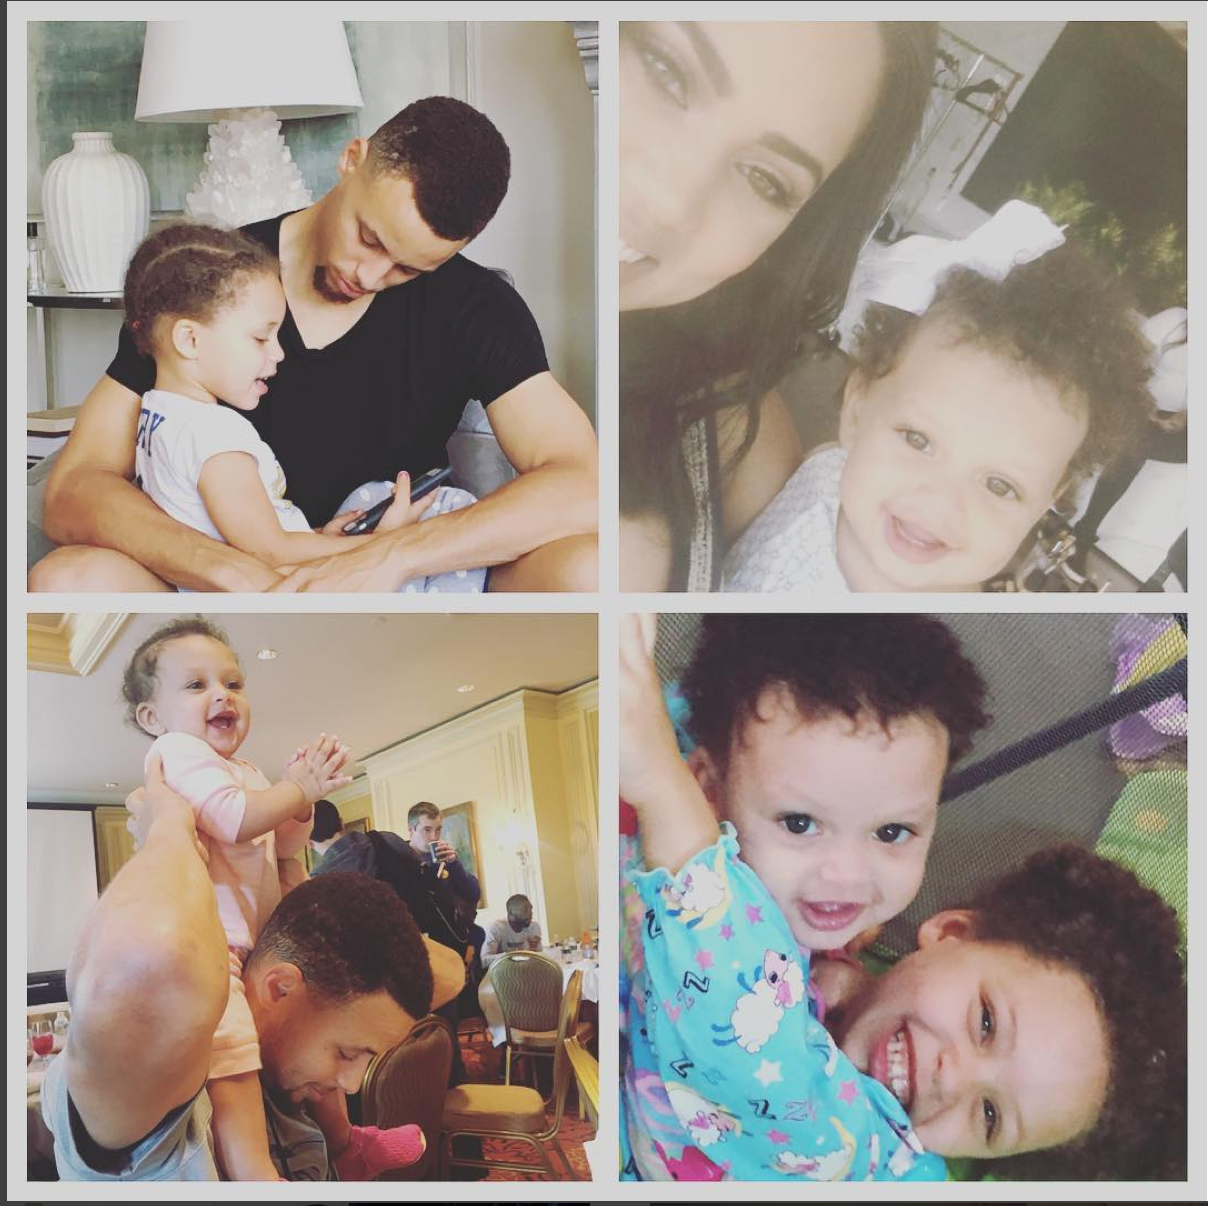 Celebs Share Sweet Father's Day Messages
